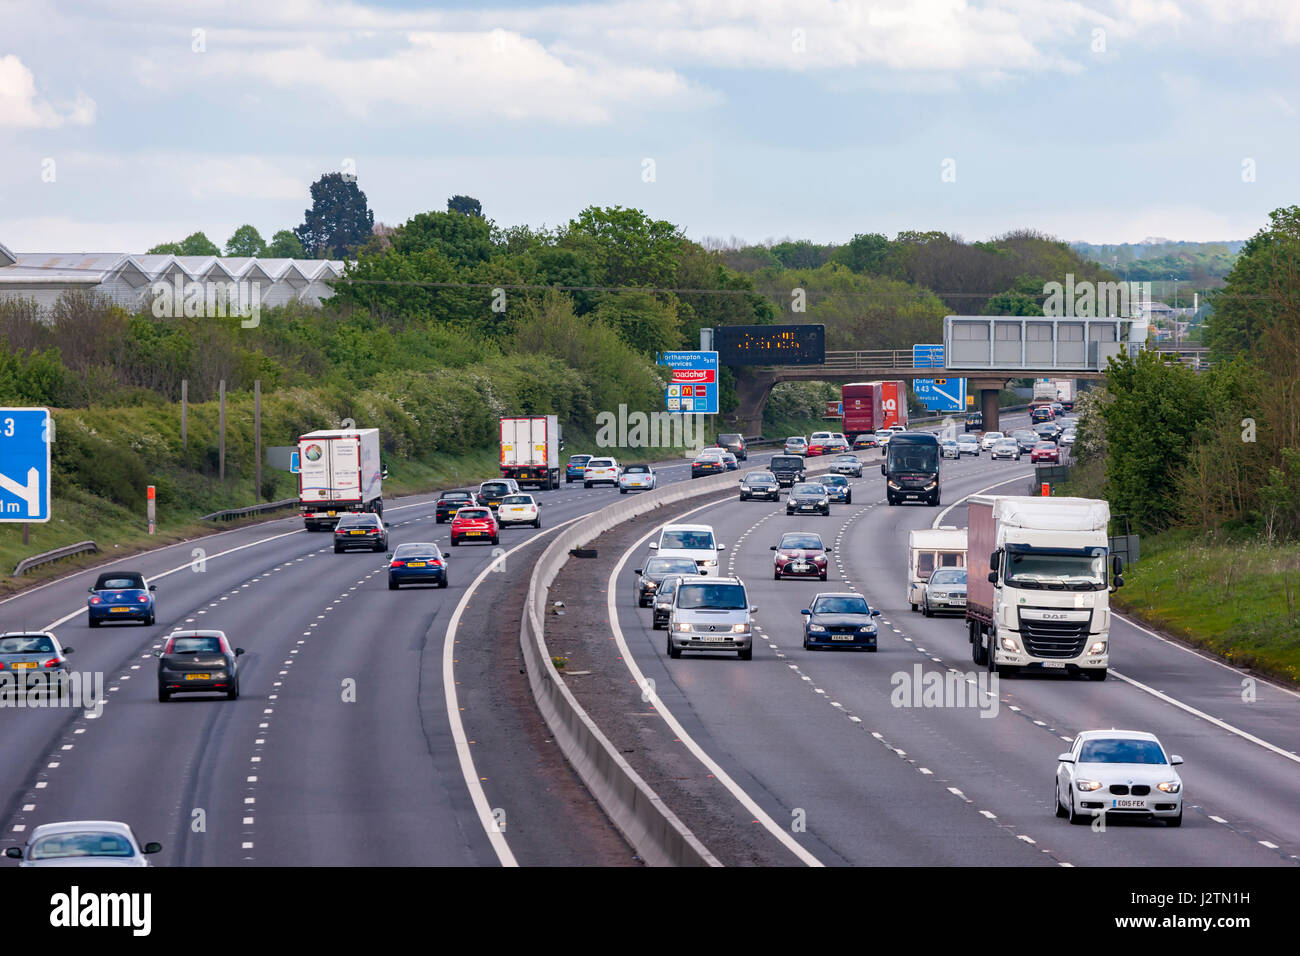 Northampton. M1 Junction 15/16 .1st May 2017. Traffic flowing freely on the motorway early this evening after the Bank holiday weekend, but the traffic is busy further south in Bedfordshire. Credit: Keith J Smith./Alamy Live News Stock Photo